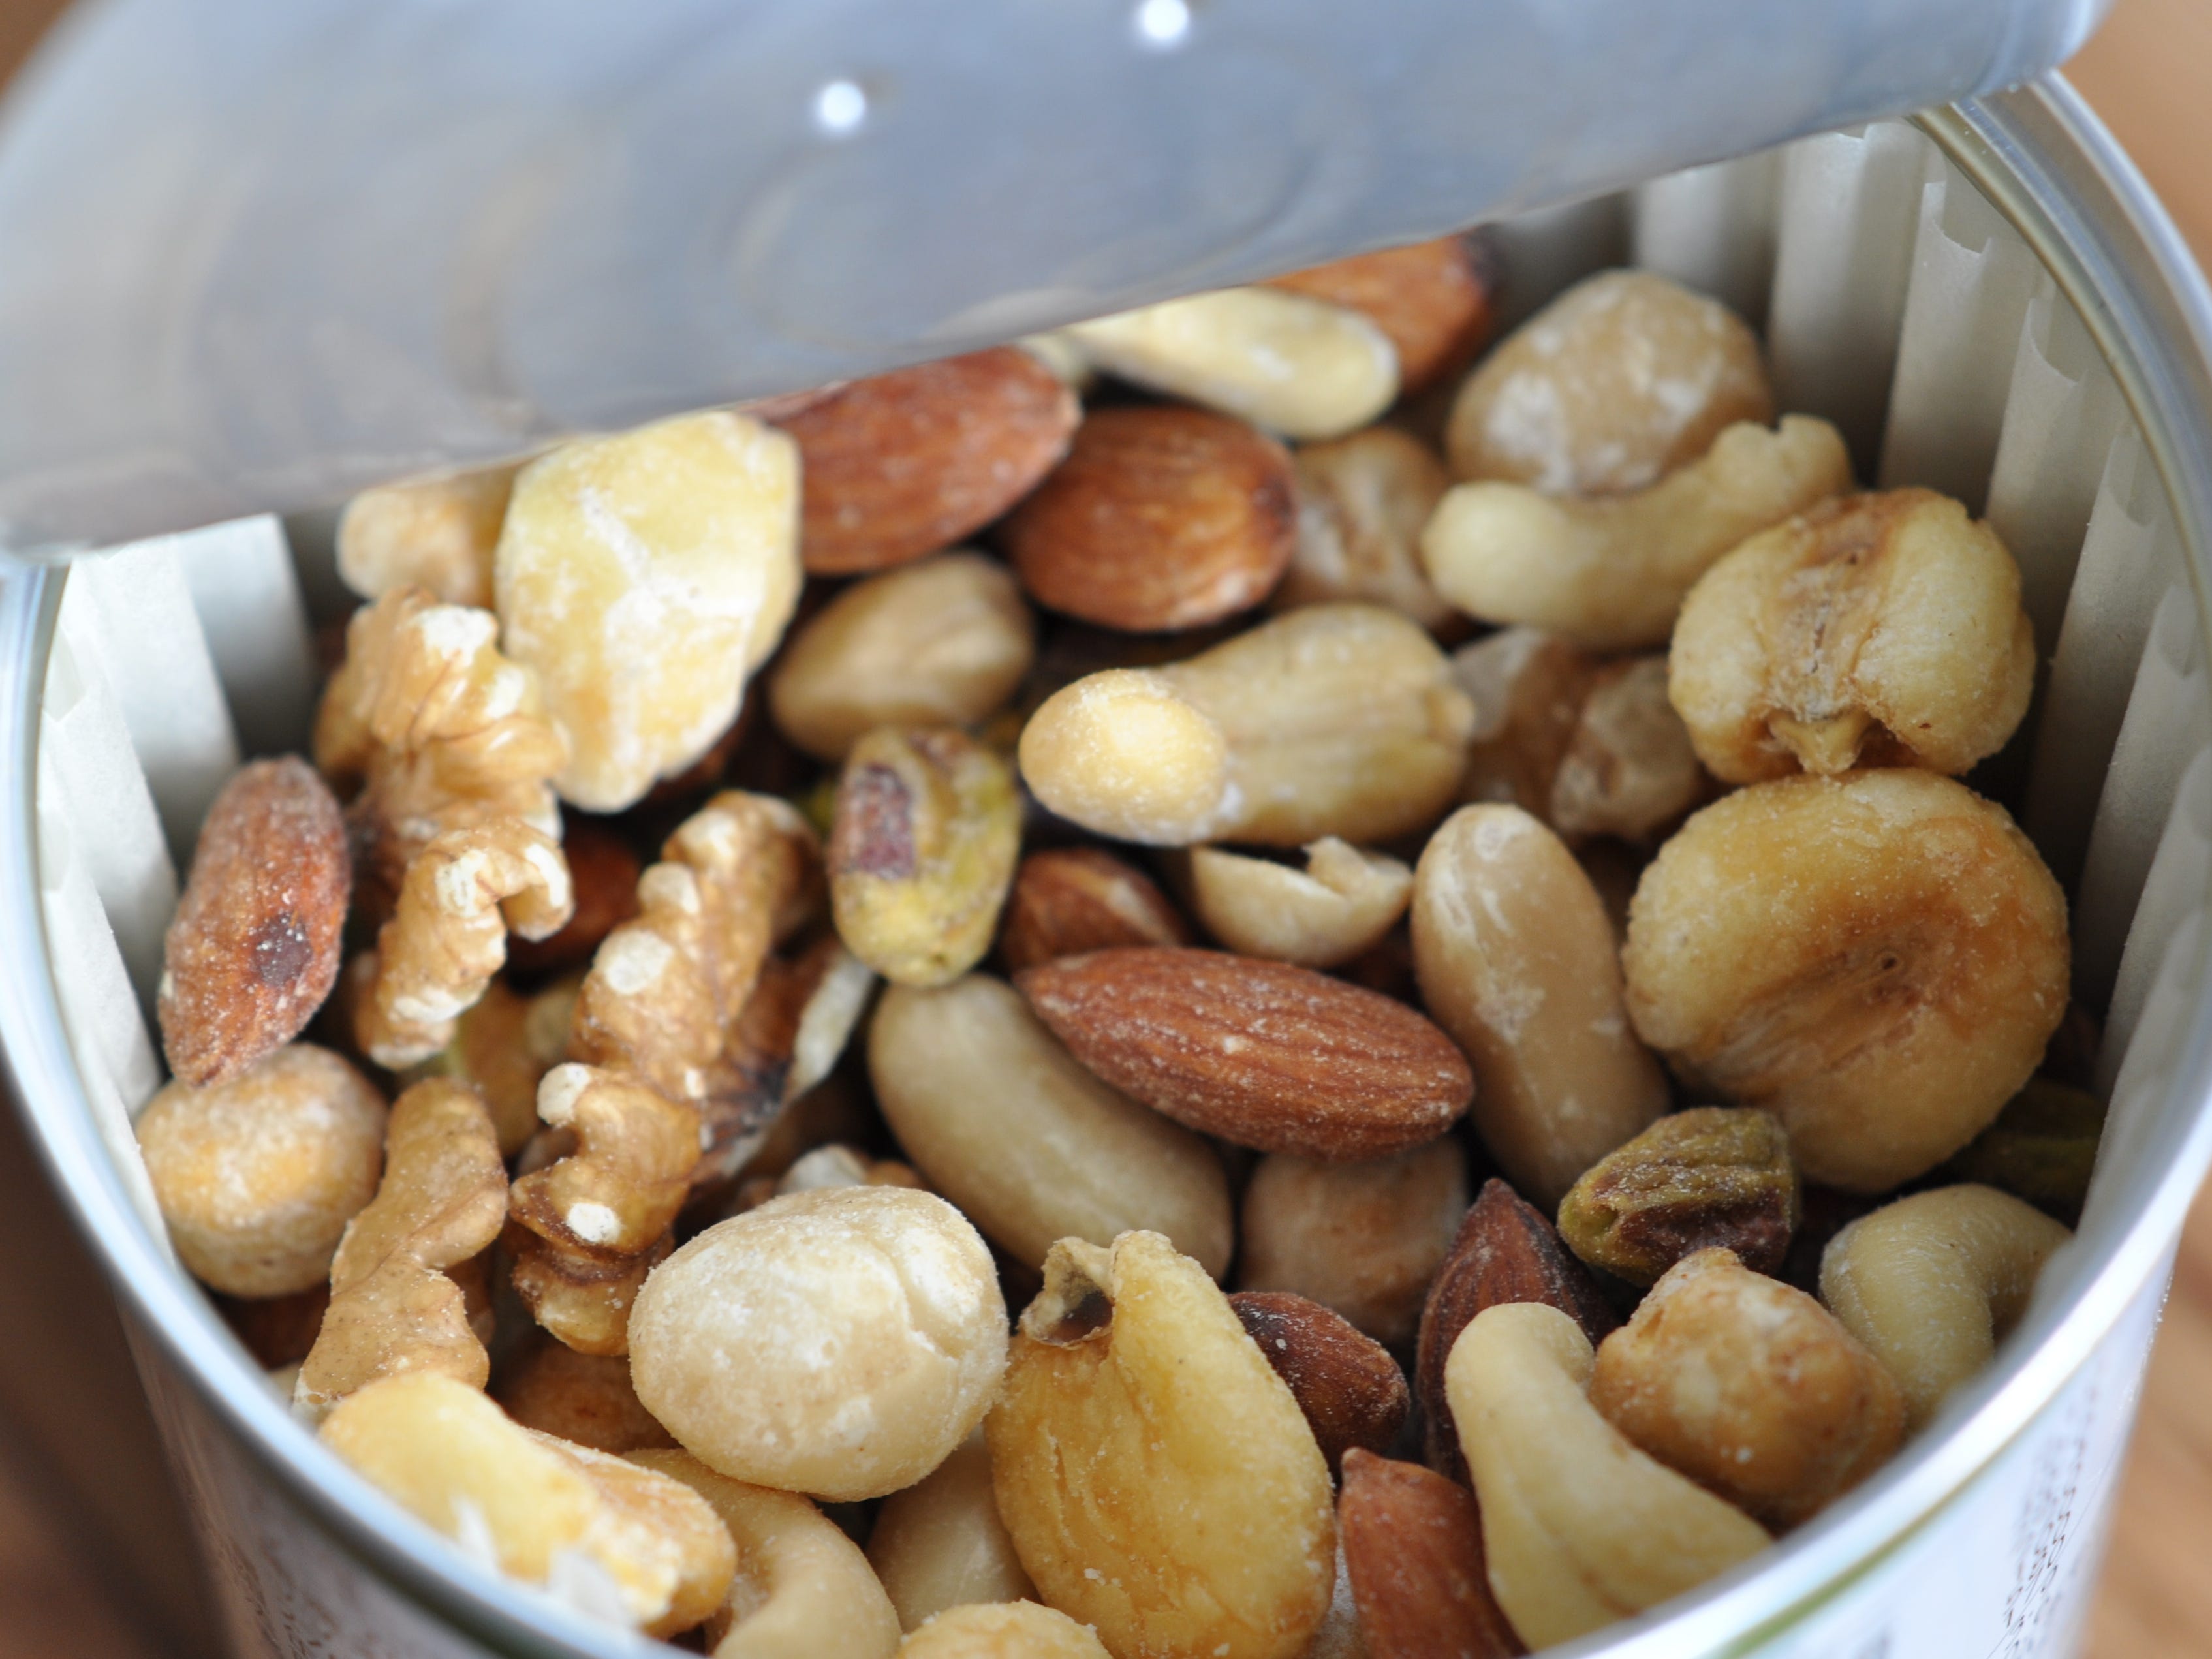 <p>"Nuts are a great portable and nutritious addition to any healthy lifestyle plan," Gulbin told Insider.</p><p>Almonds, pistachios, and peanuts average around <a href="https://www.healthline.com/nutrition/9-proven-benefits-of-almonds#TOC_TITLE_HDR_2">6 grams of protein</a> per 1-ounce serving with about 3 grams of gut-friendly fiber.</p>